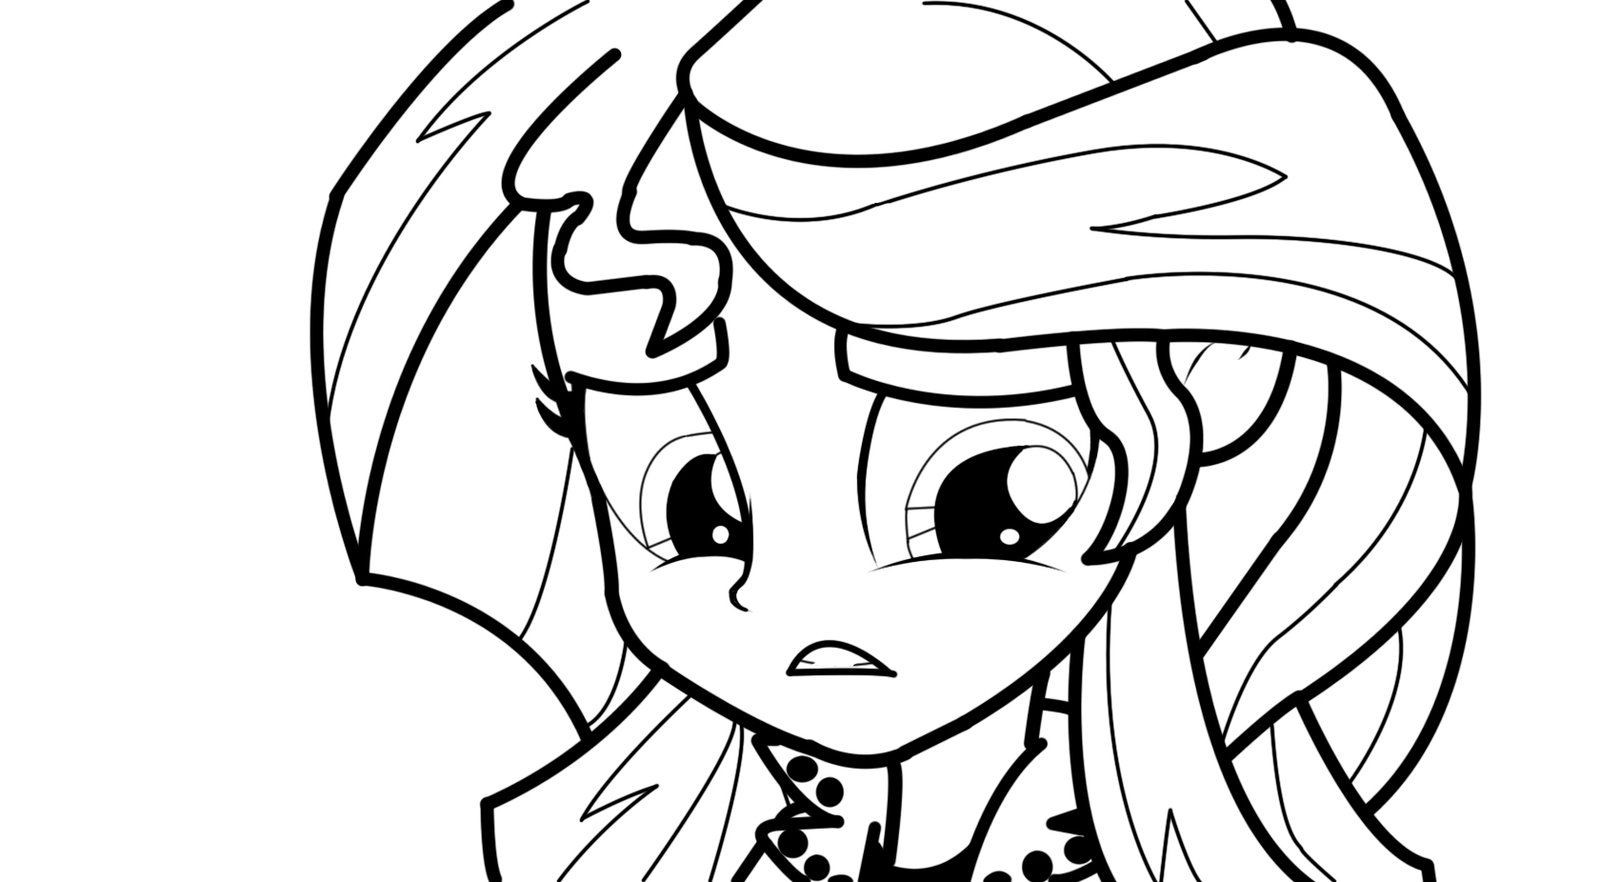 Equestria Girls Sunset Shimmer Coloring Pages
 Beach Sunset Coloring Pages at GetColorings